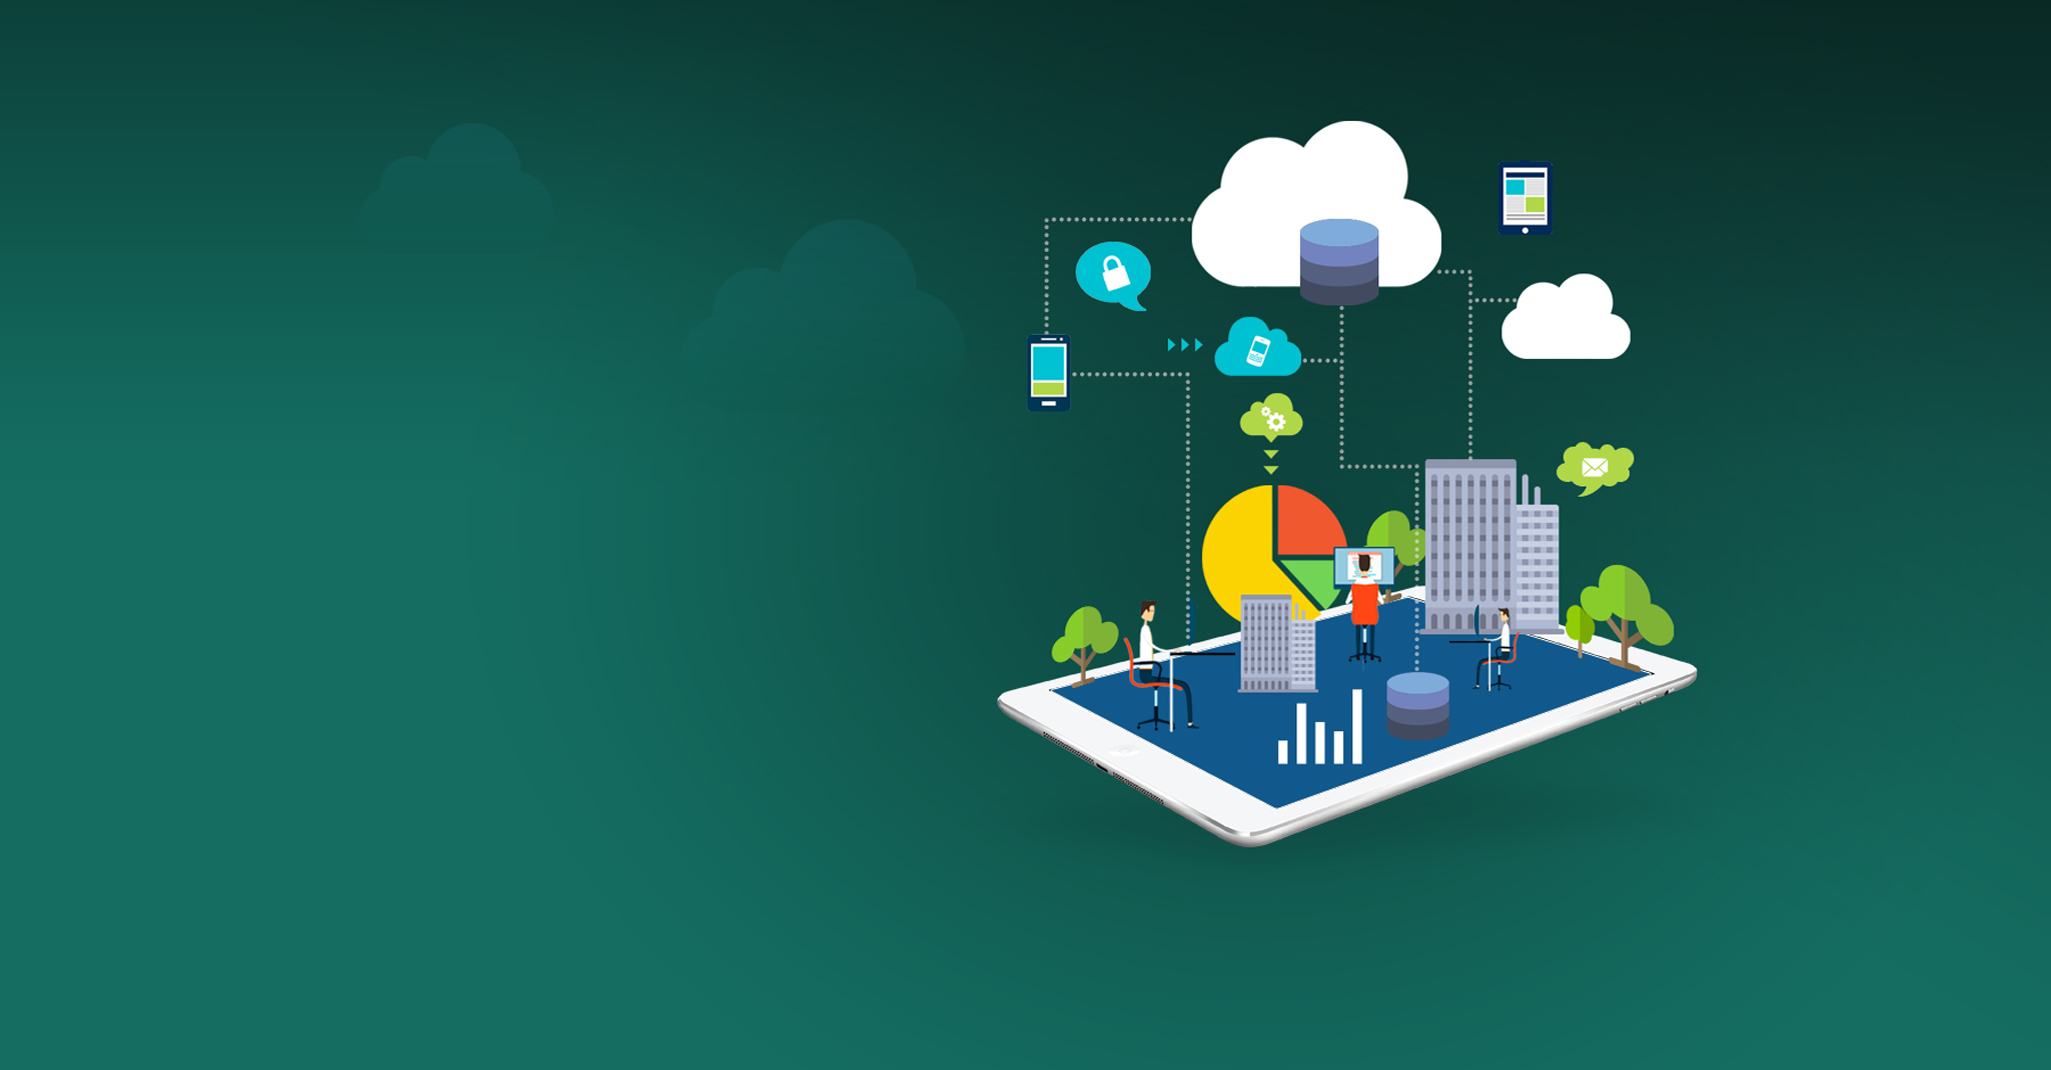 green background with trees, buildings, charts and people on top of a tablet connected to clouds and devices in the sky